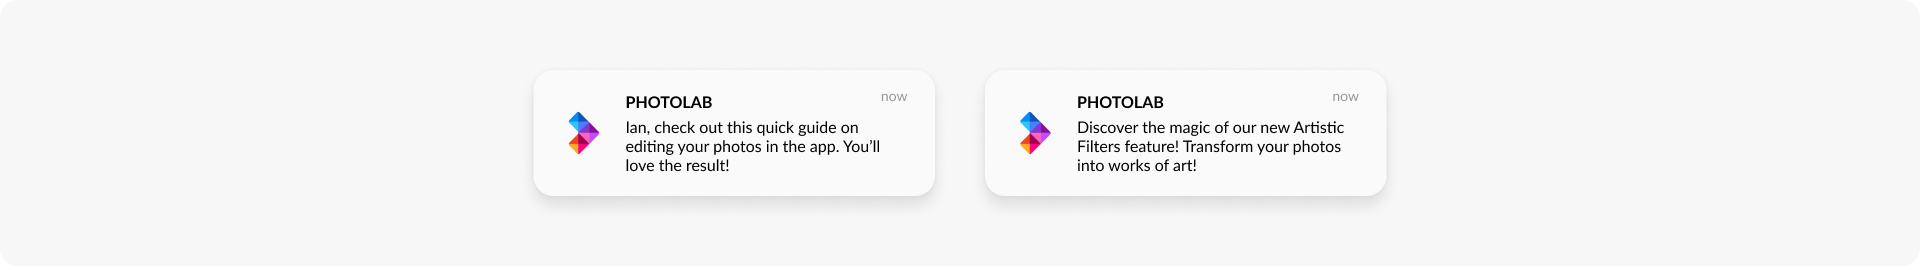 Mobile Push Notifications: The Key to App Retention